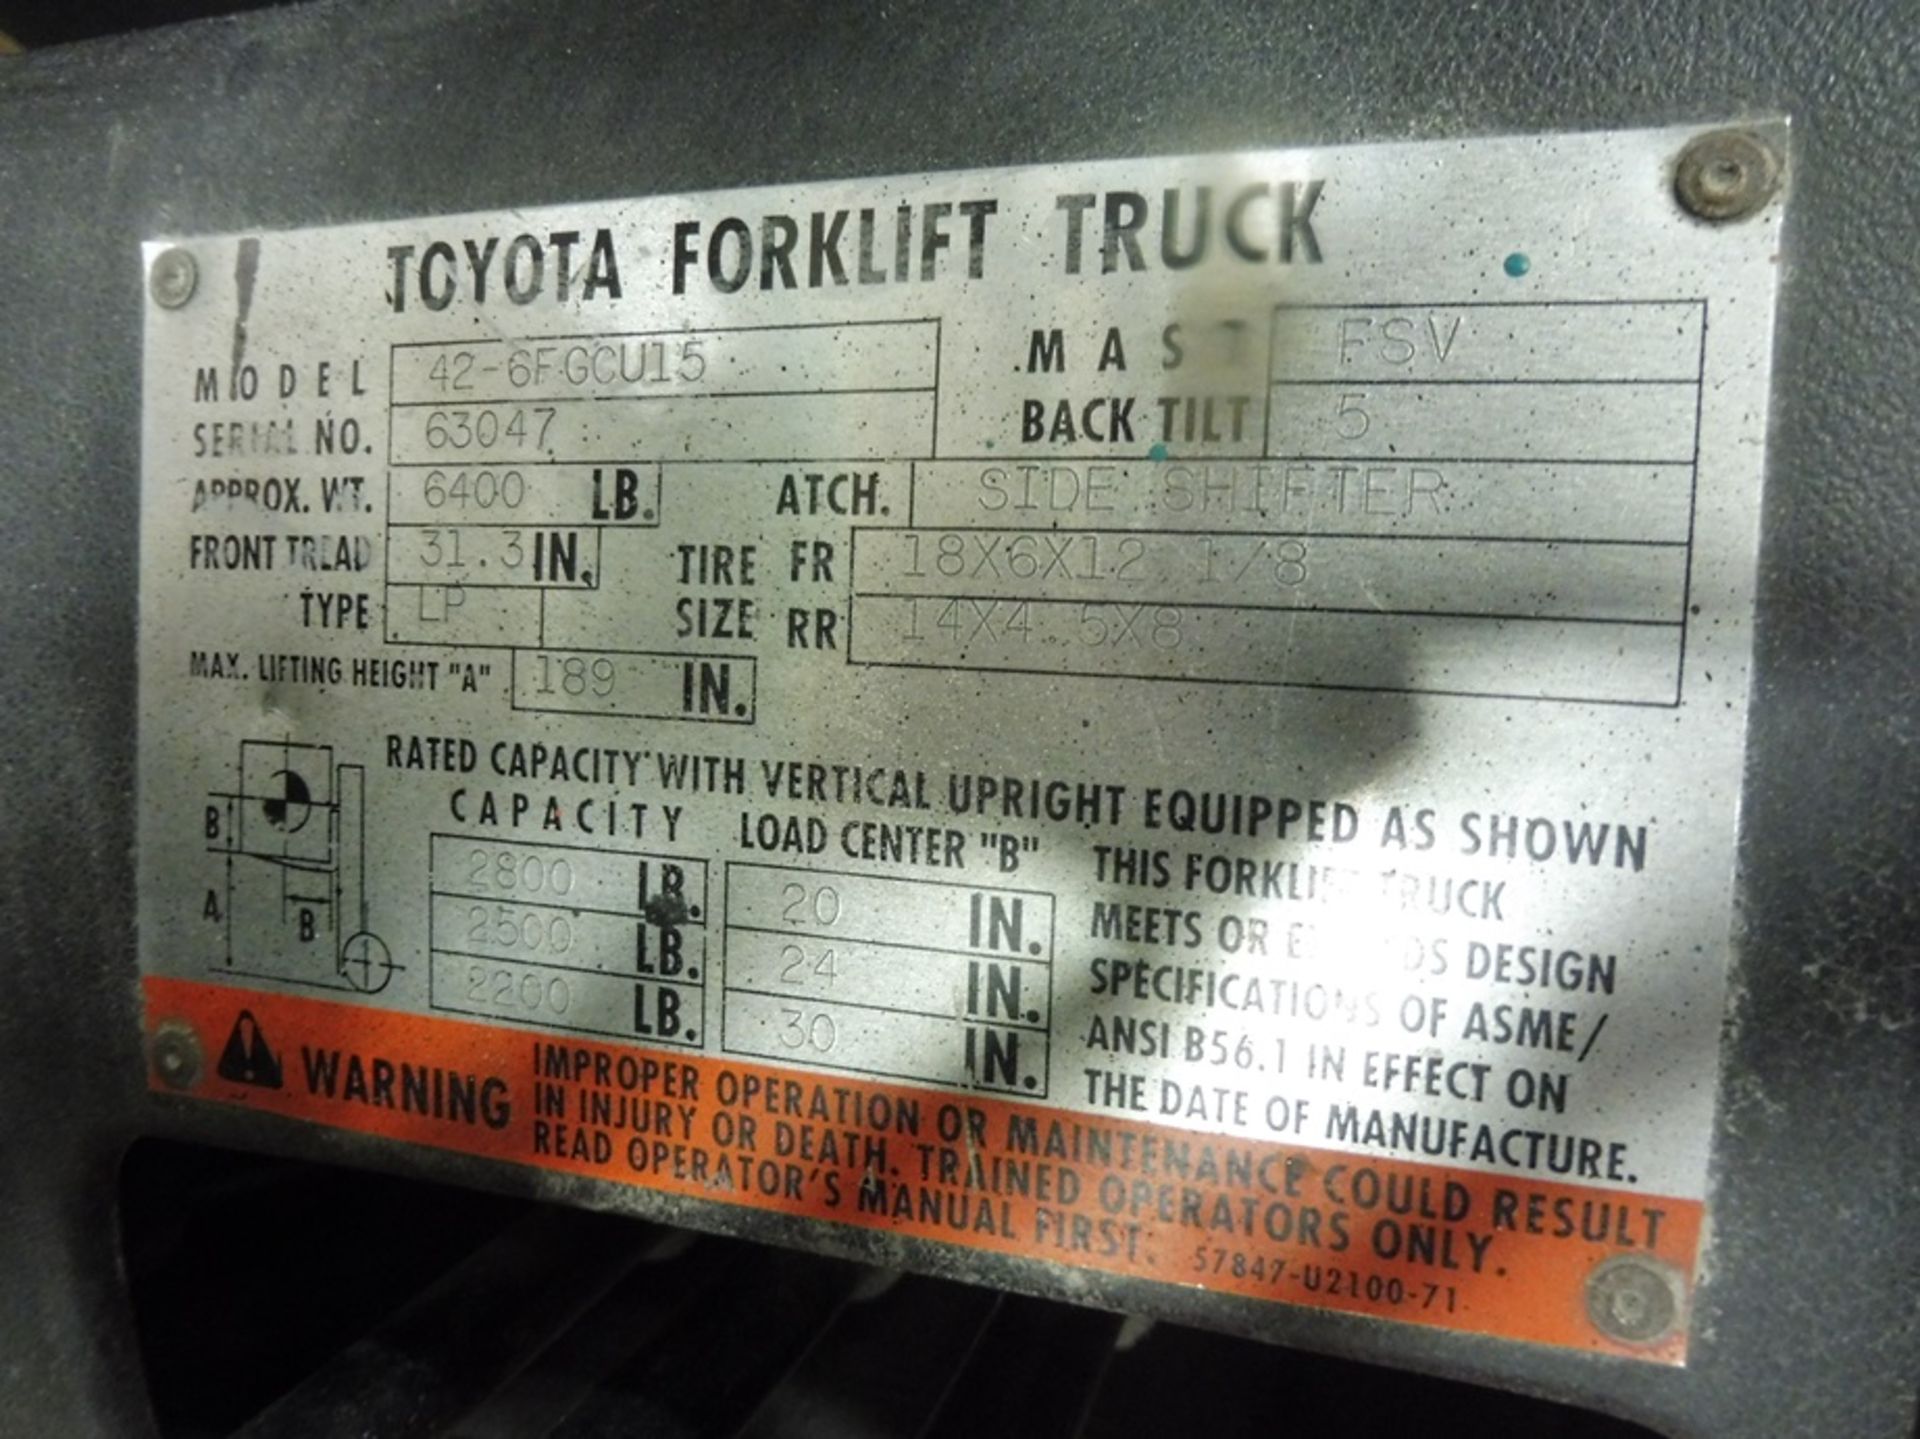 TOYOTA "42-6F-GCU15" Propane Powered Forklift Truck, S/N: 63047, 2,800LB Capacity, 3-Stage Mast, - Image 4 of 4